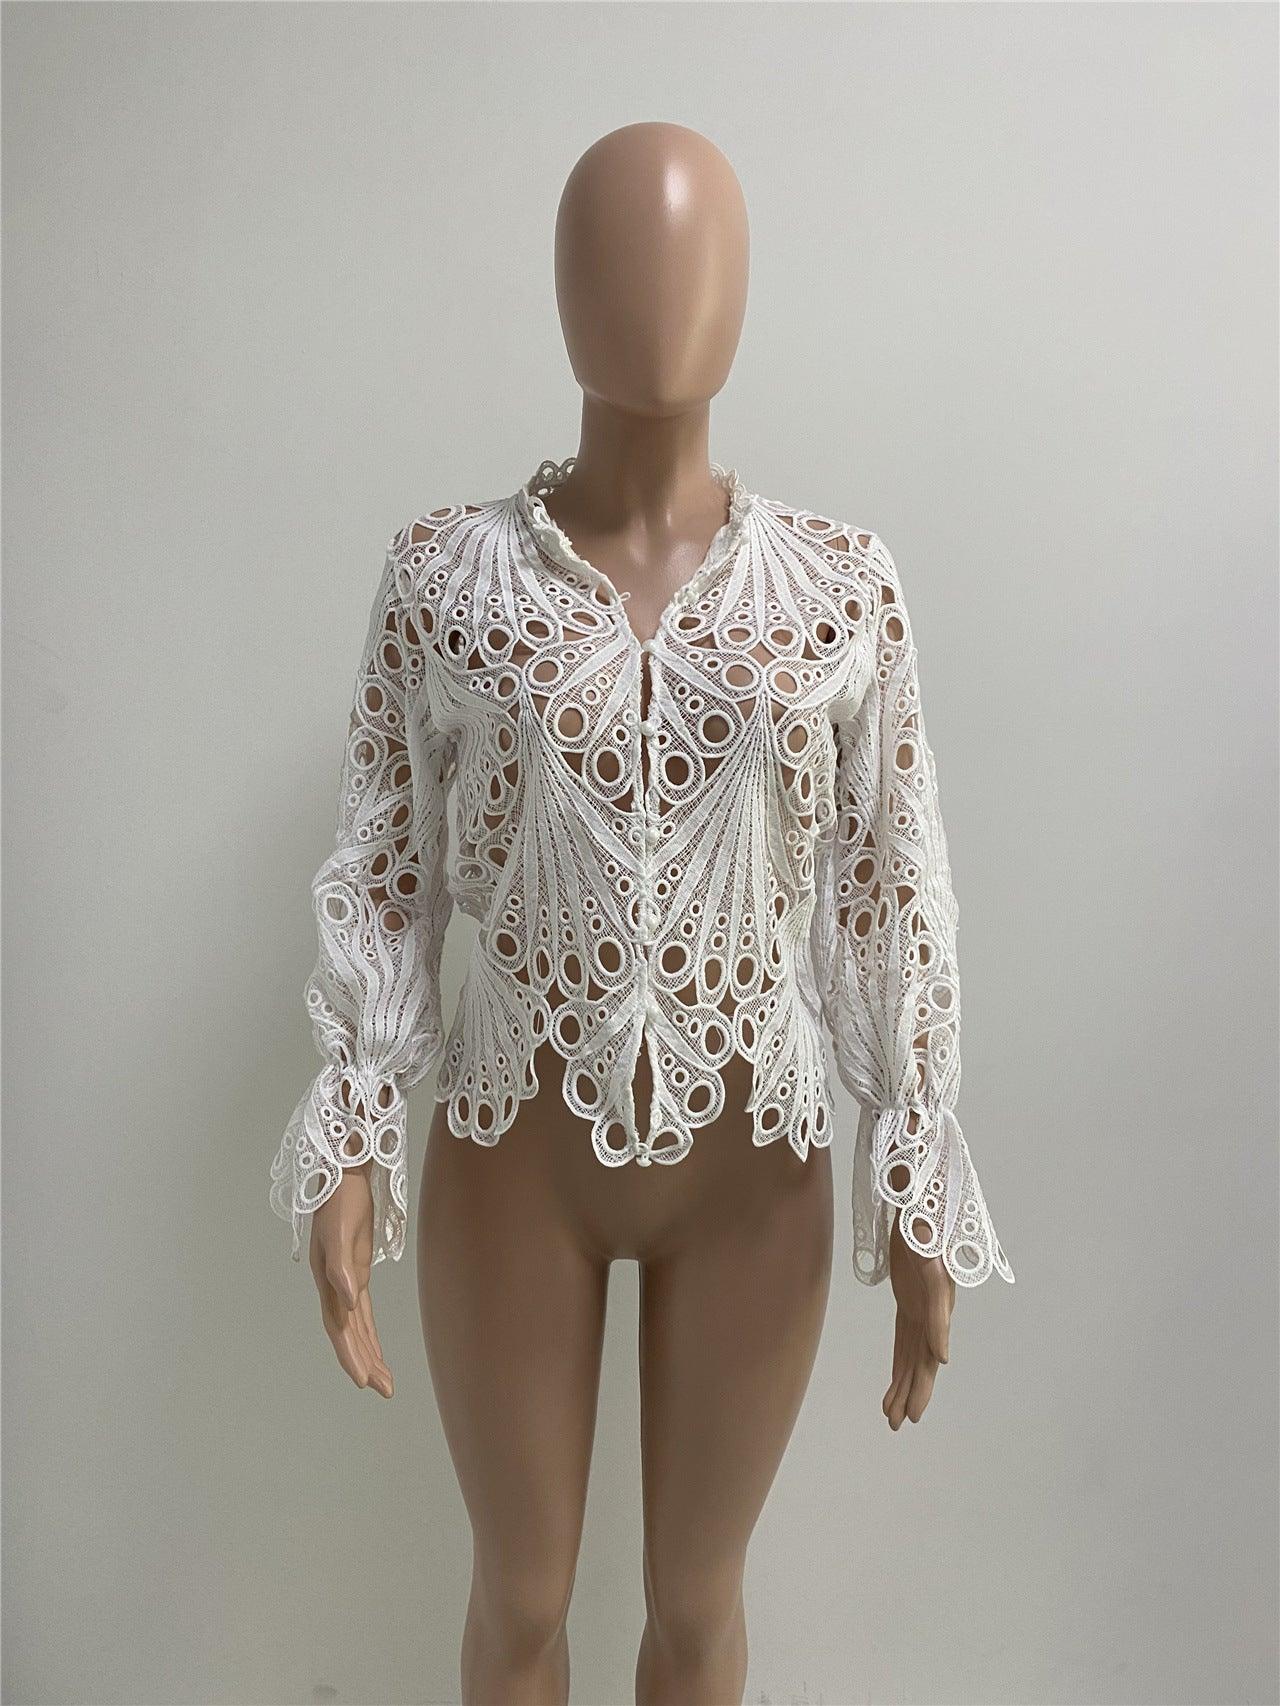 Hollowed out Sheer Mesh Blouse - ODDSALTBoutique